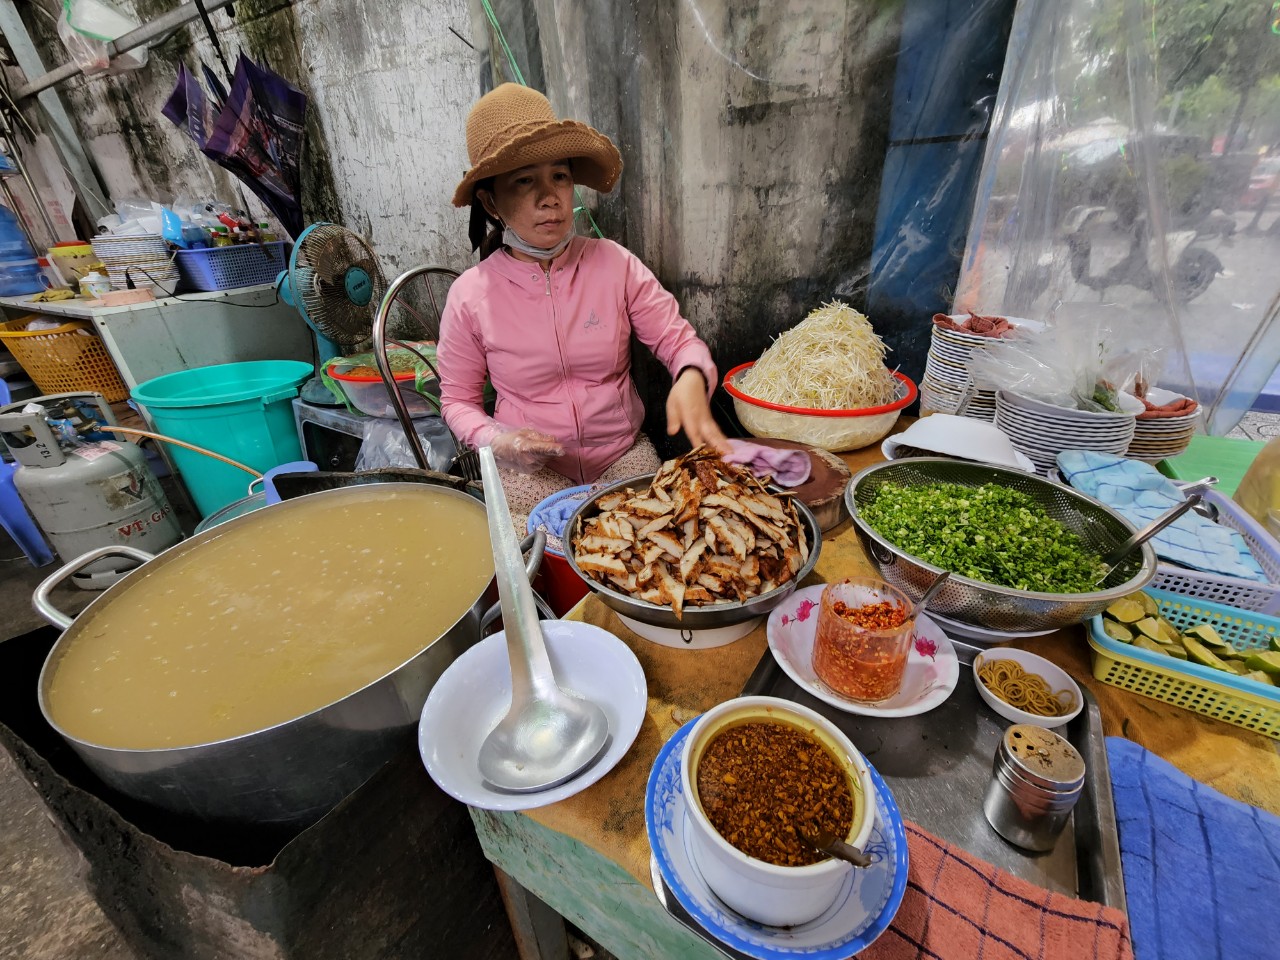 The stall has served ‘cháo chả’ for nearly 20 years. Photo: Son Lam / Tuoi Tre News